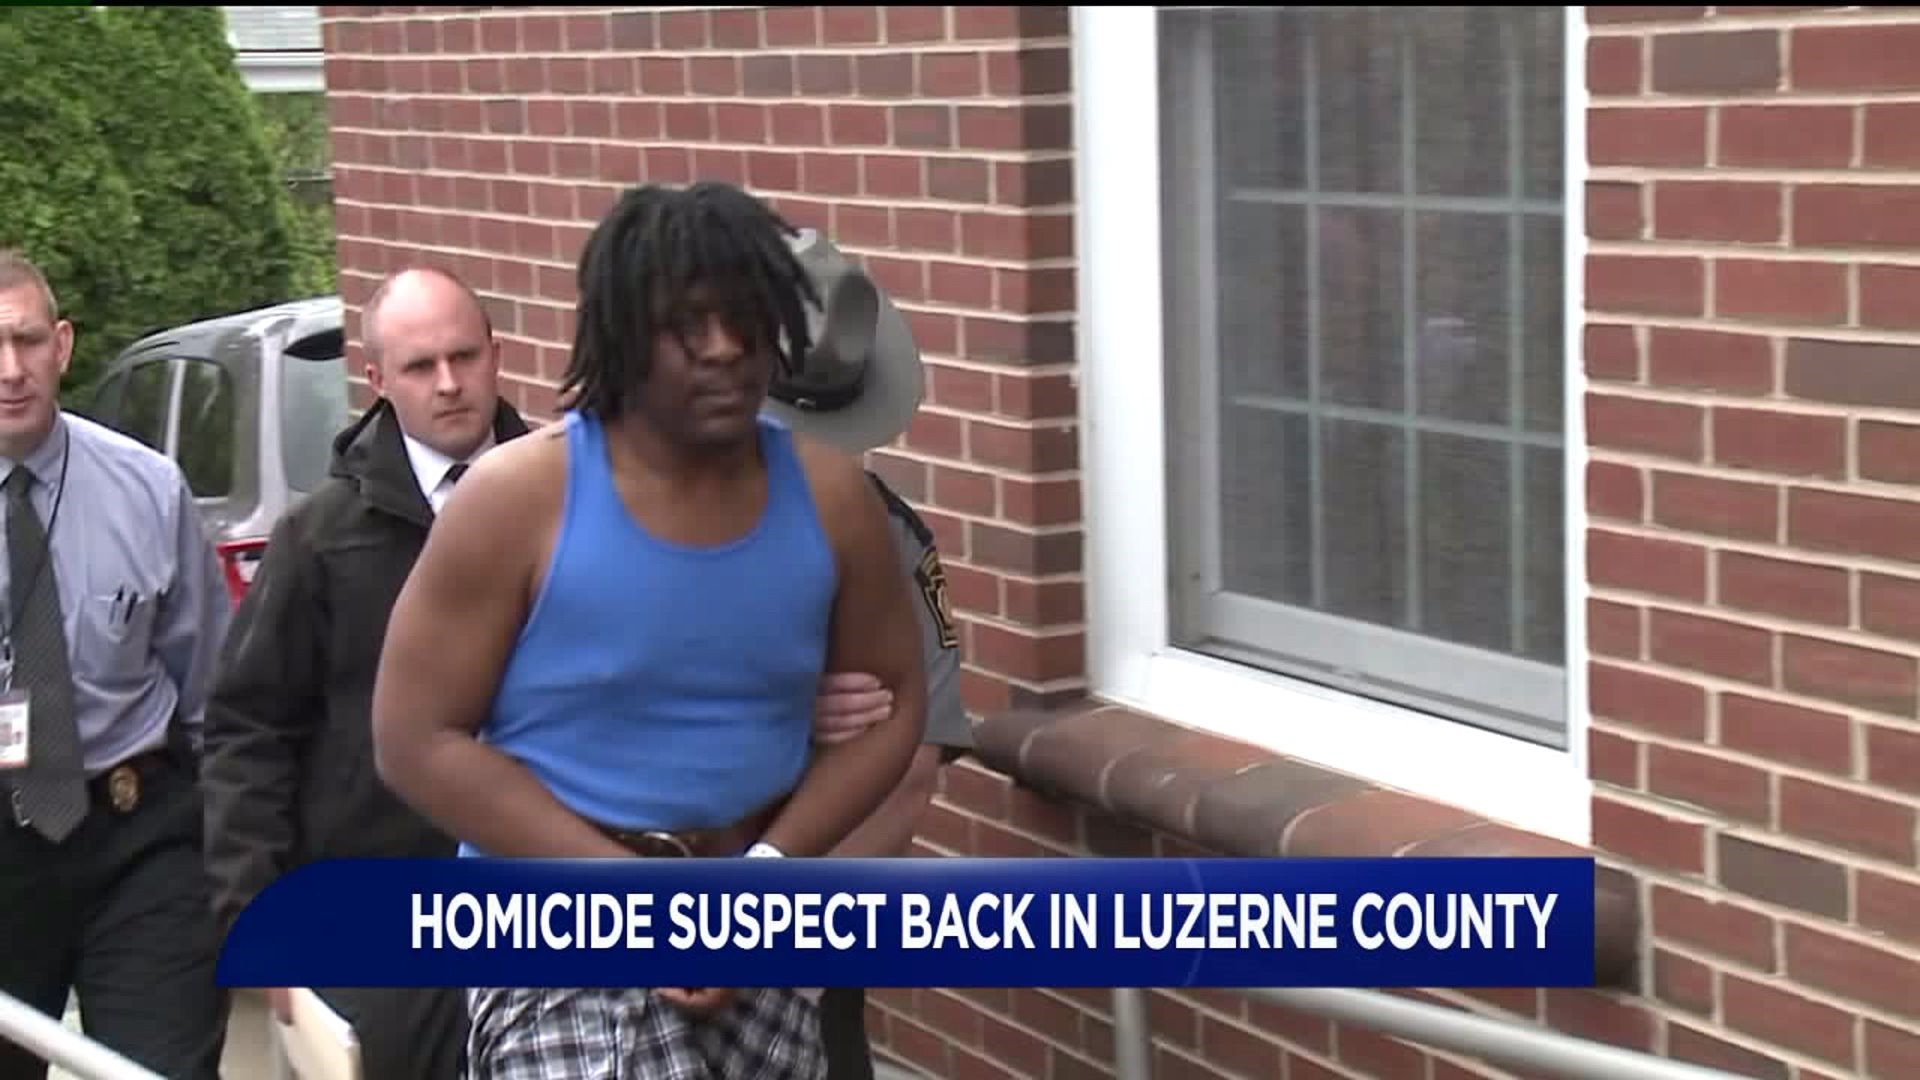 Homicide Suspect Back in Luzerne County